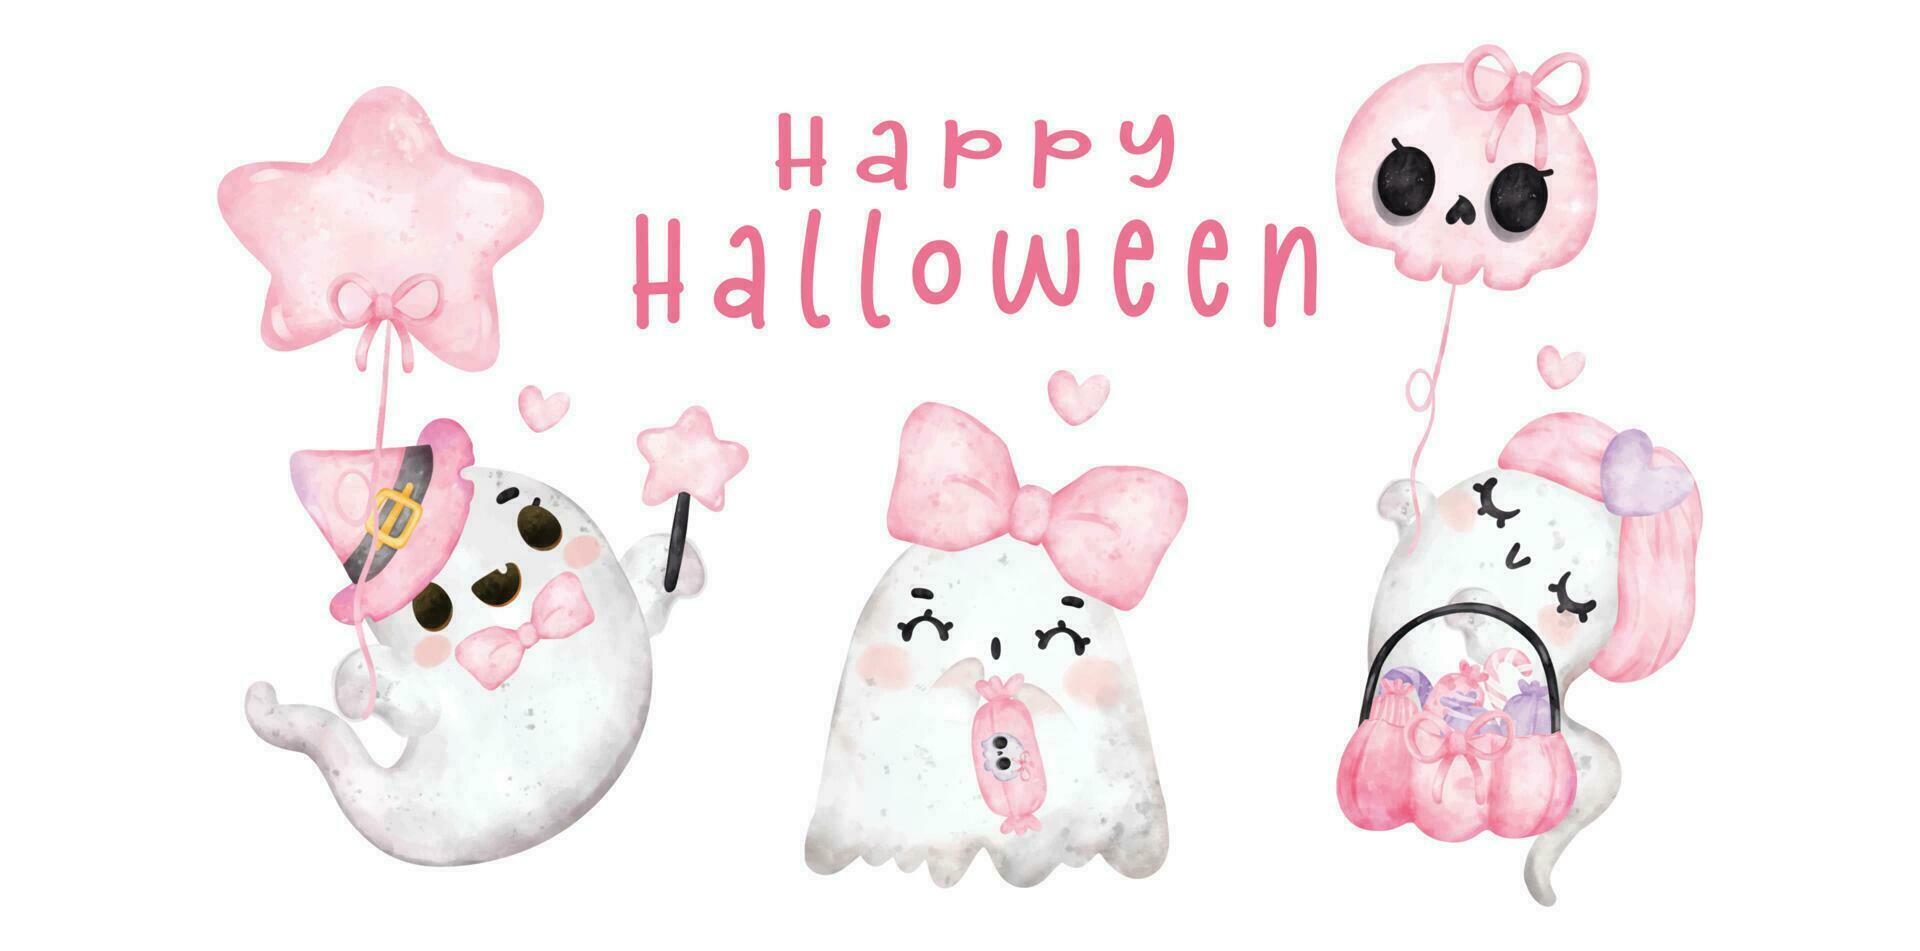 Group of Cute happy smile kawaii pink ghost Happy Halloween banner, cartoon character watercolour hand painted vector